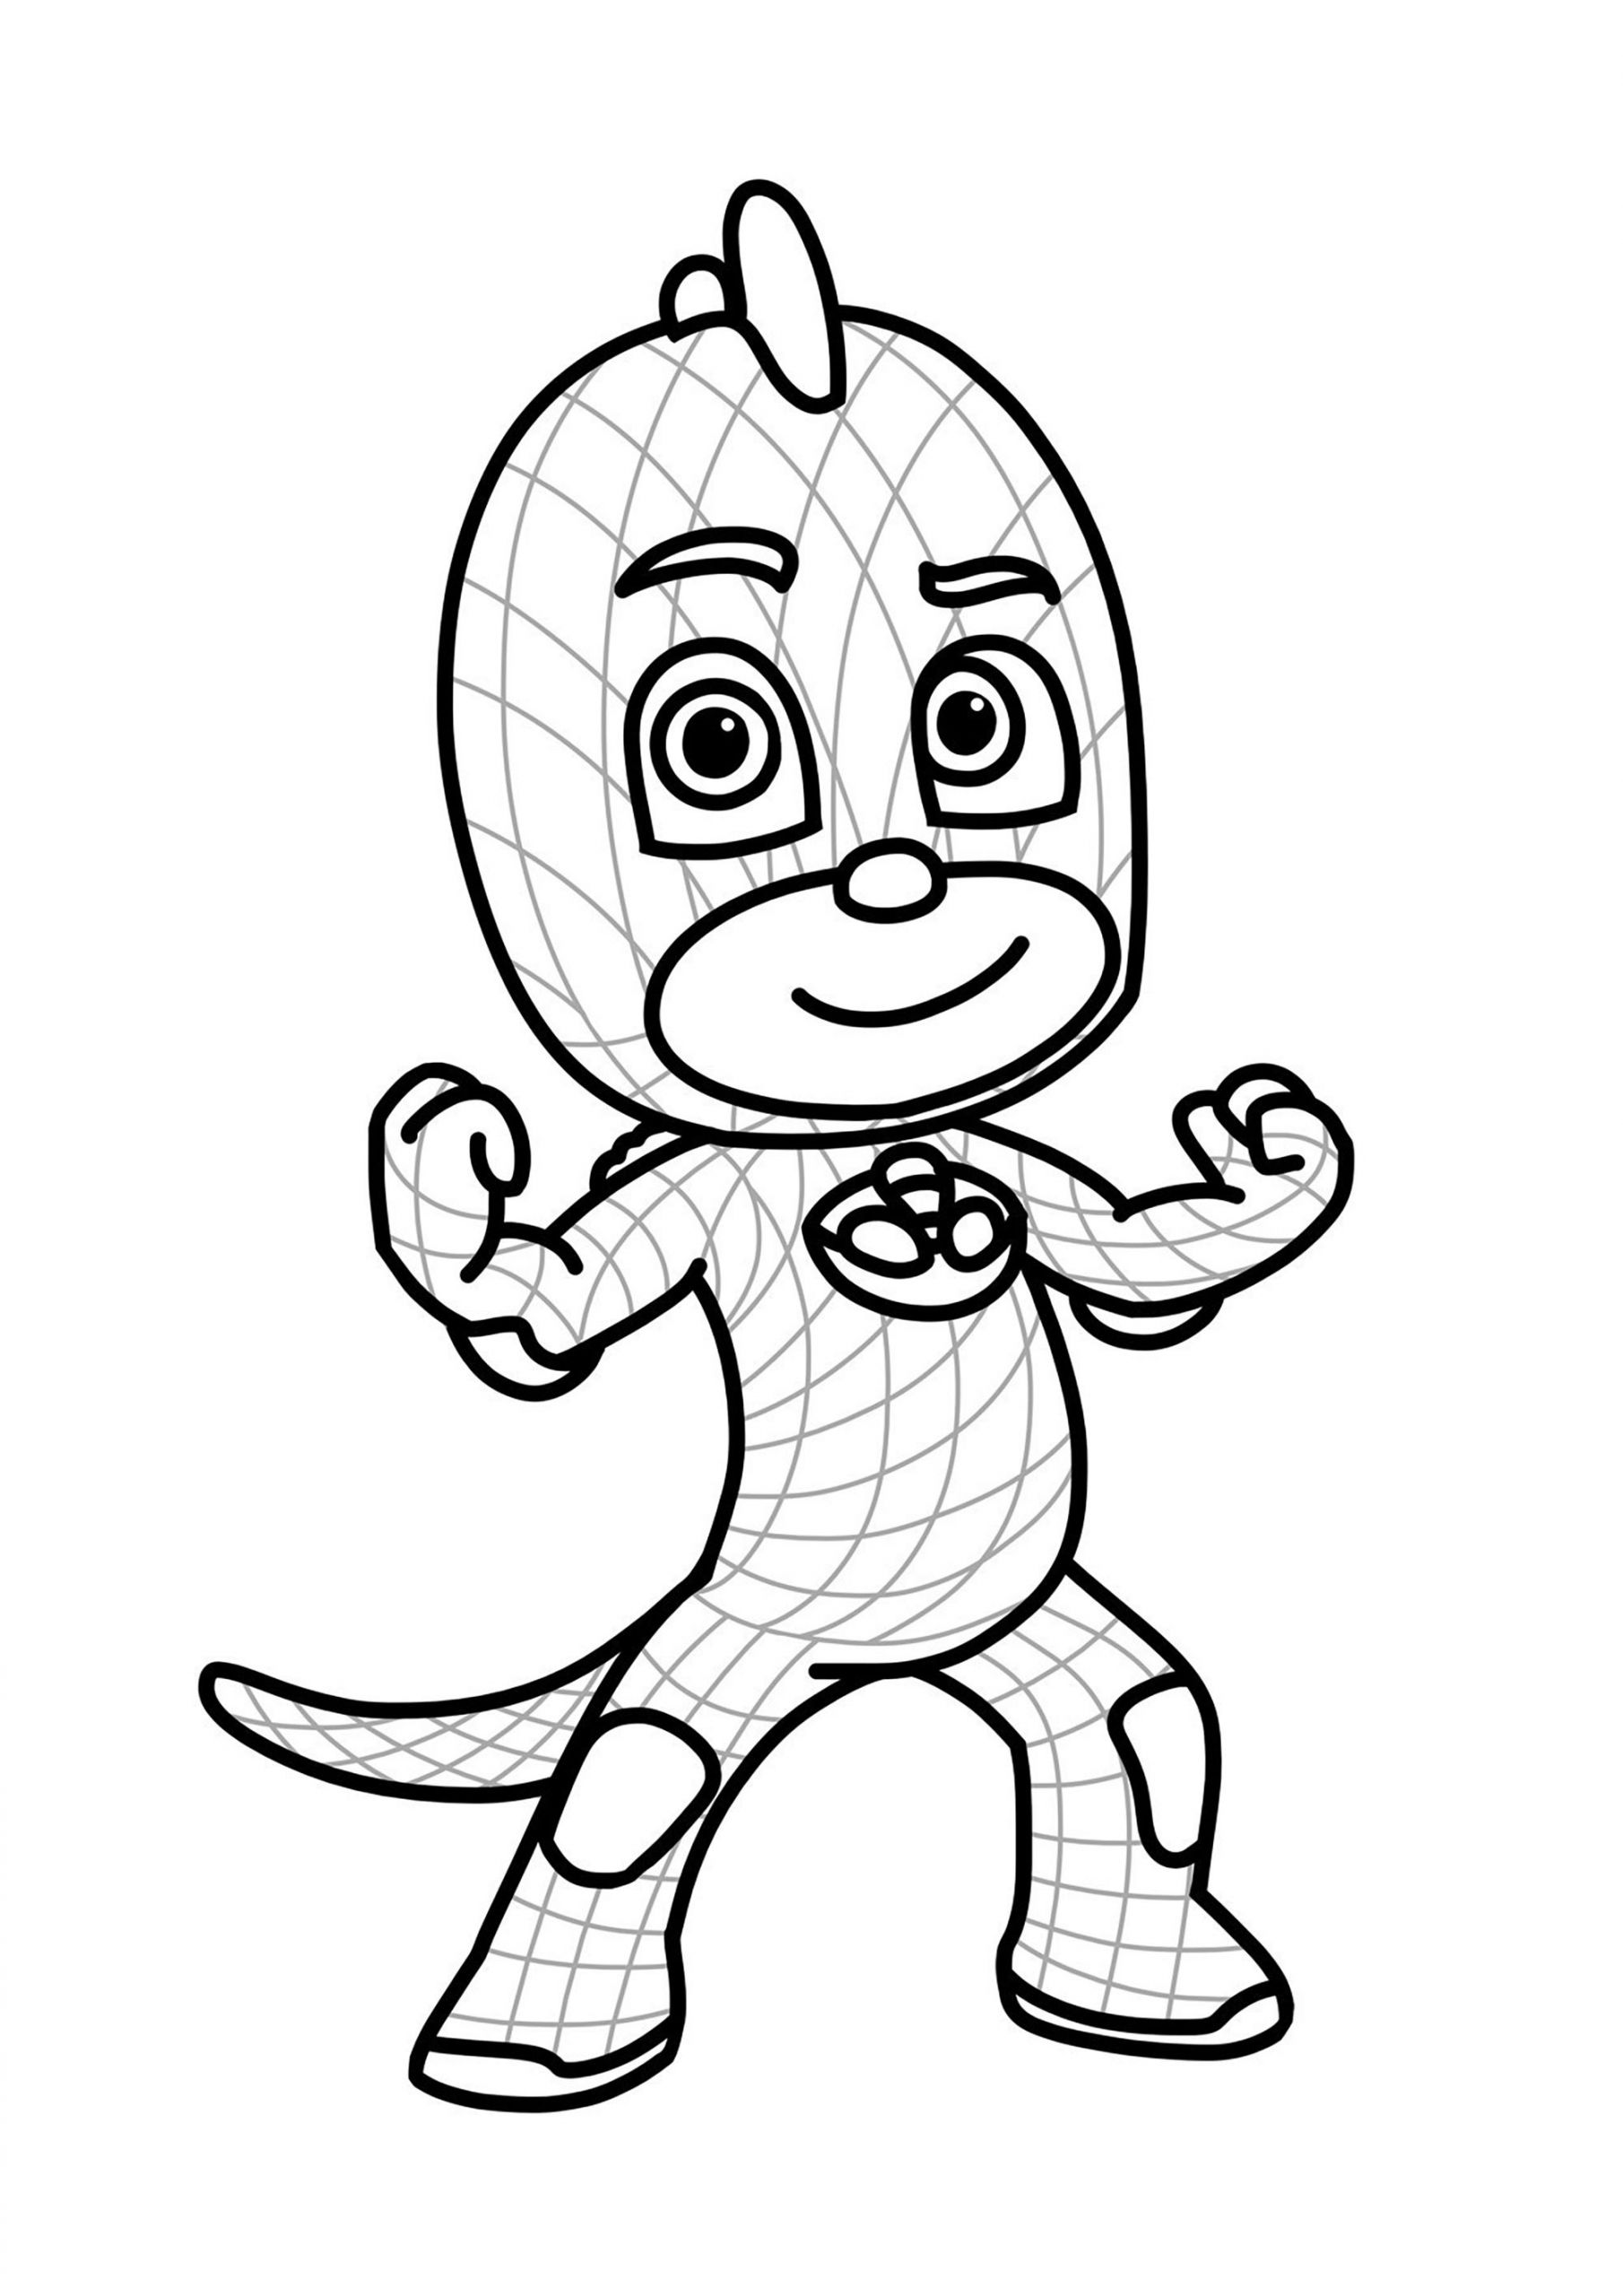 Coloring Pages For Children
 Pj masks free to color for children PJ Masks Kids